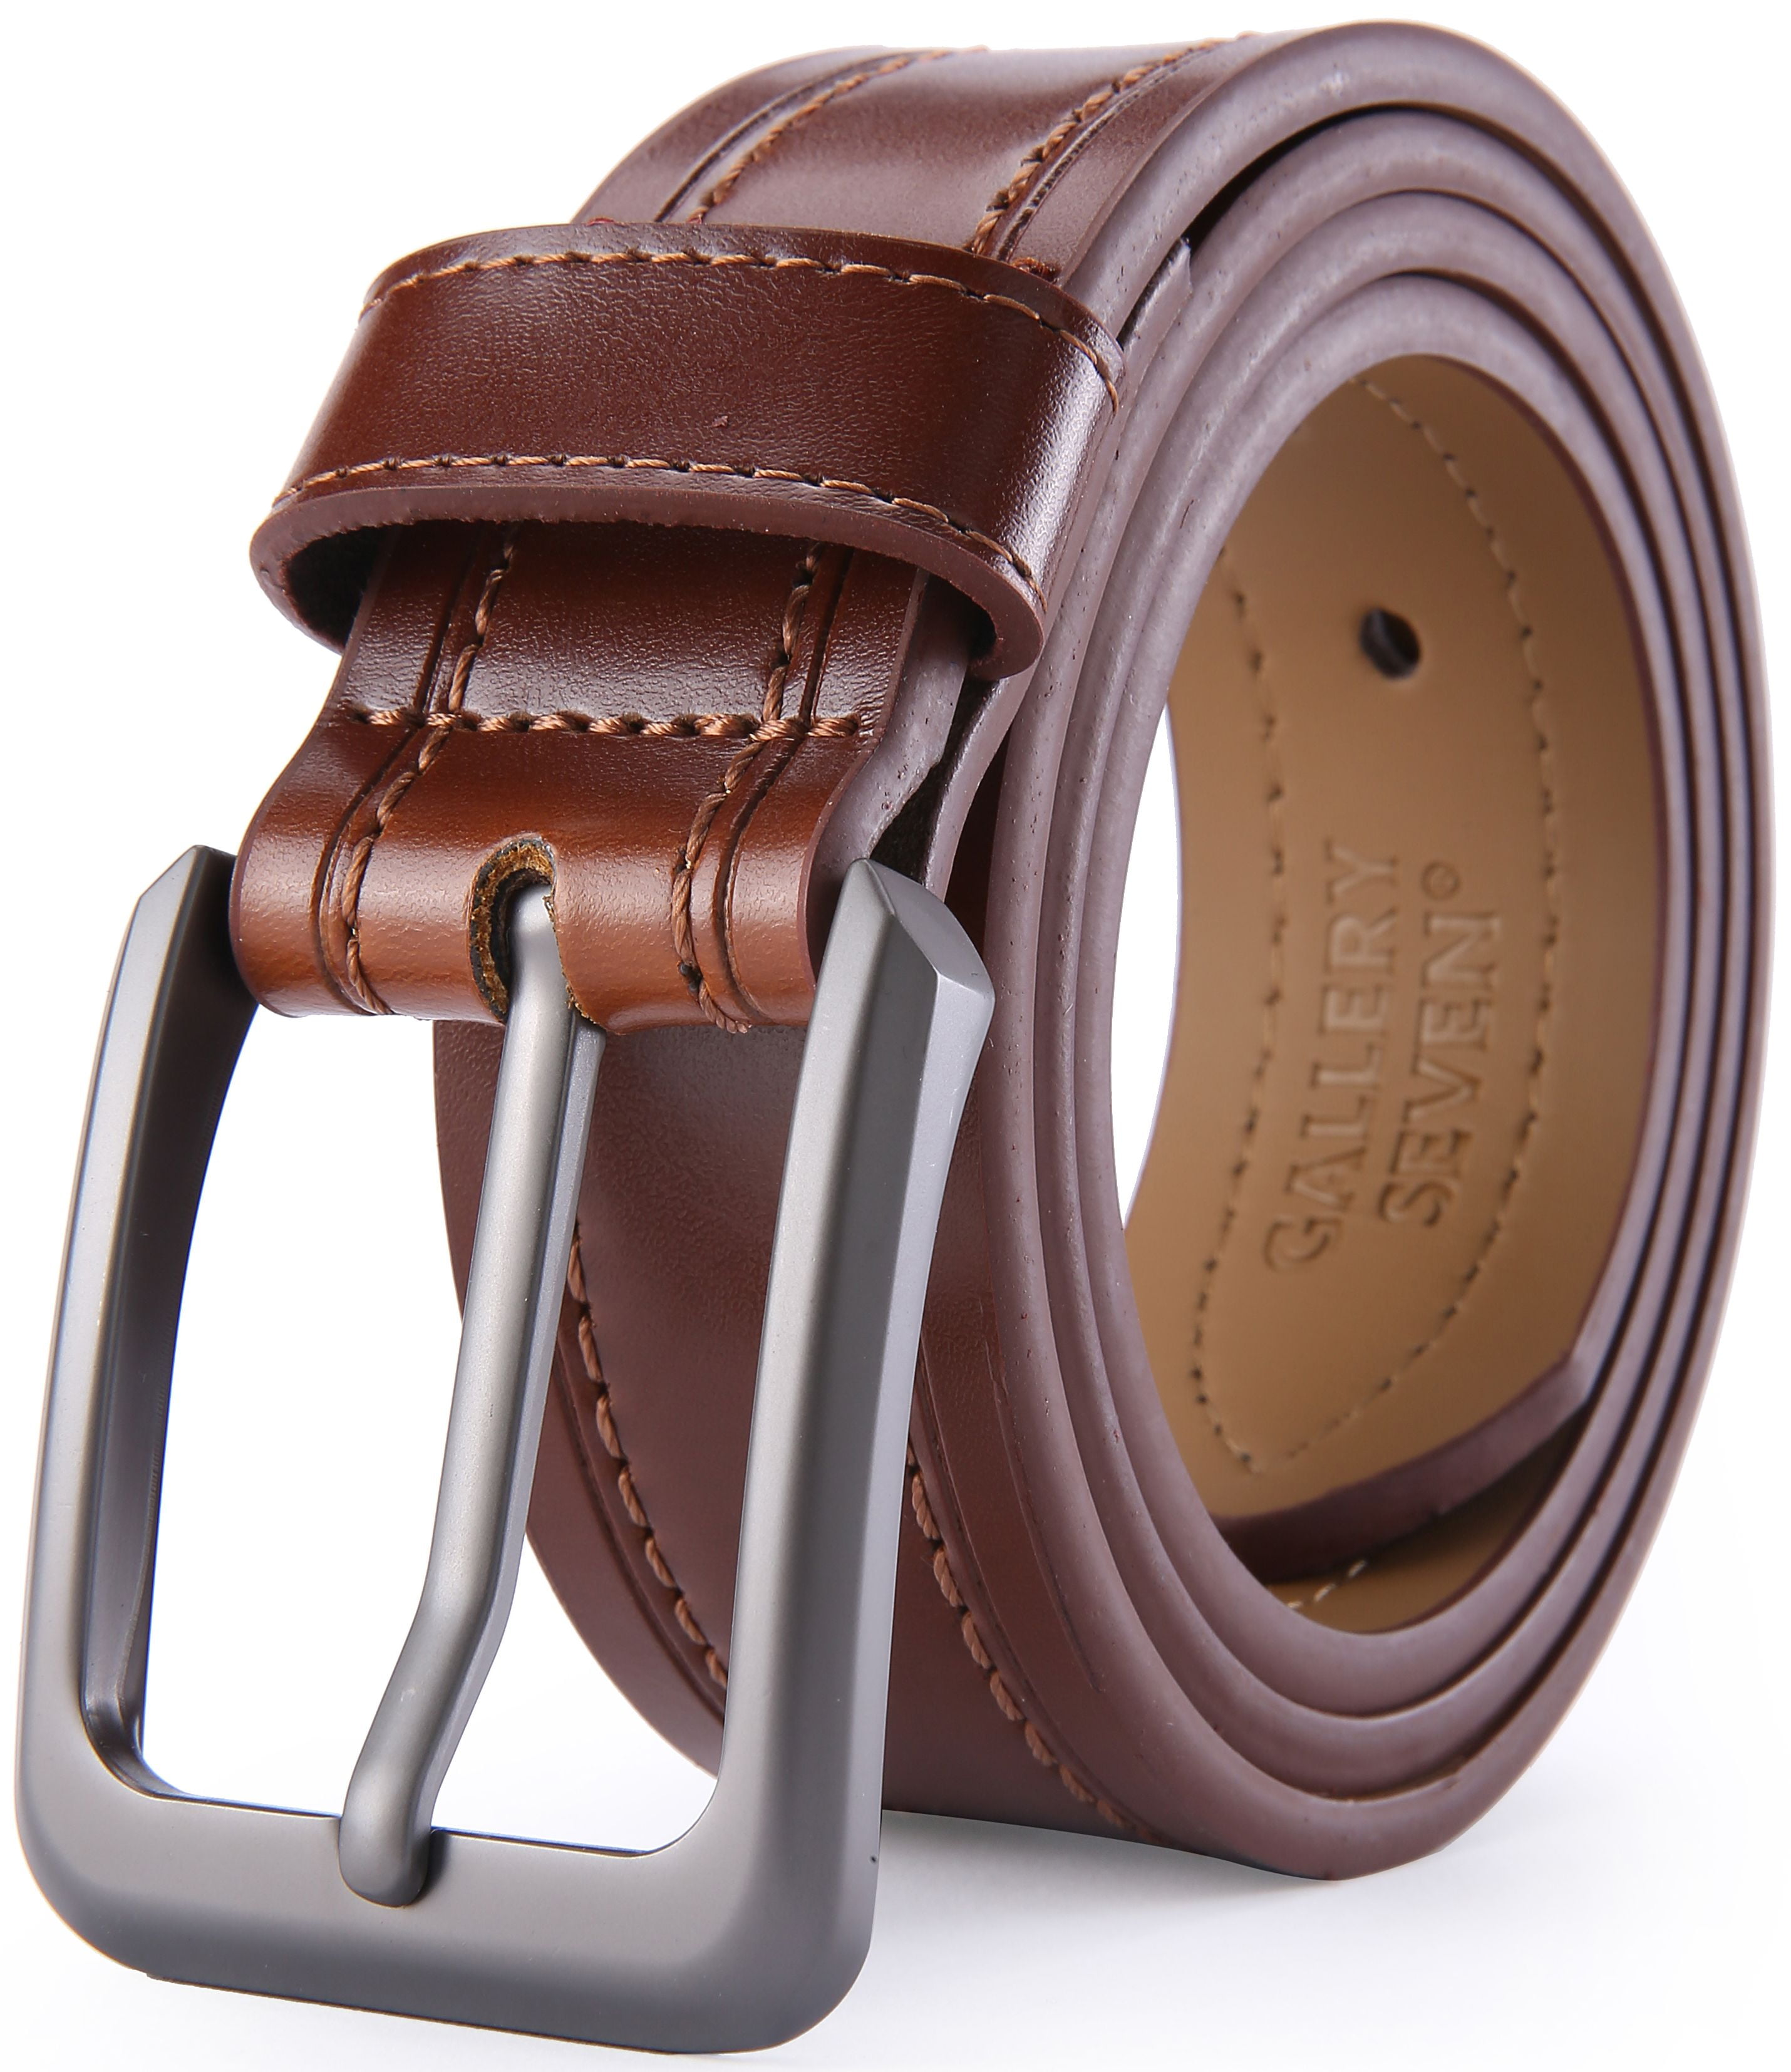 Mens Luxury Leather Belt 1.5" 40mm High Quality Vintage Style Belts 